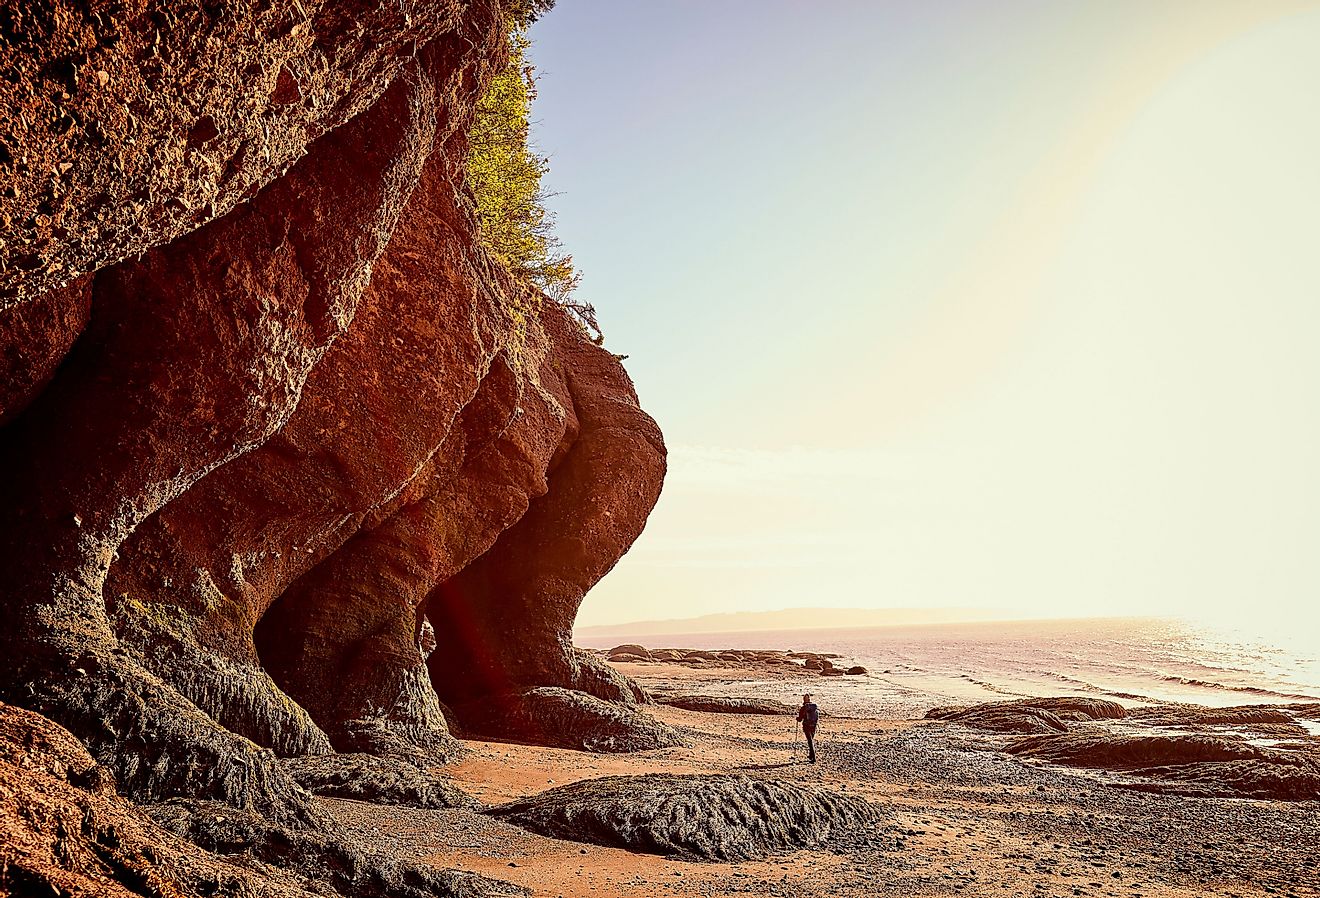 Tourist walking on the beach under a beautiful cliff on the coast of New Brunswick, Canada at the Bay of Fundy at low tide. Image credit  Julien Faugere via Shutterstock.